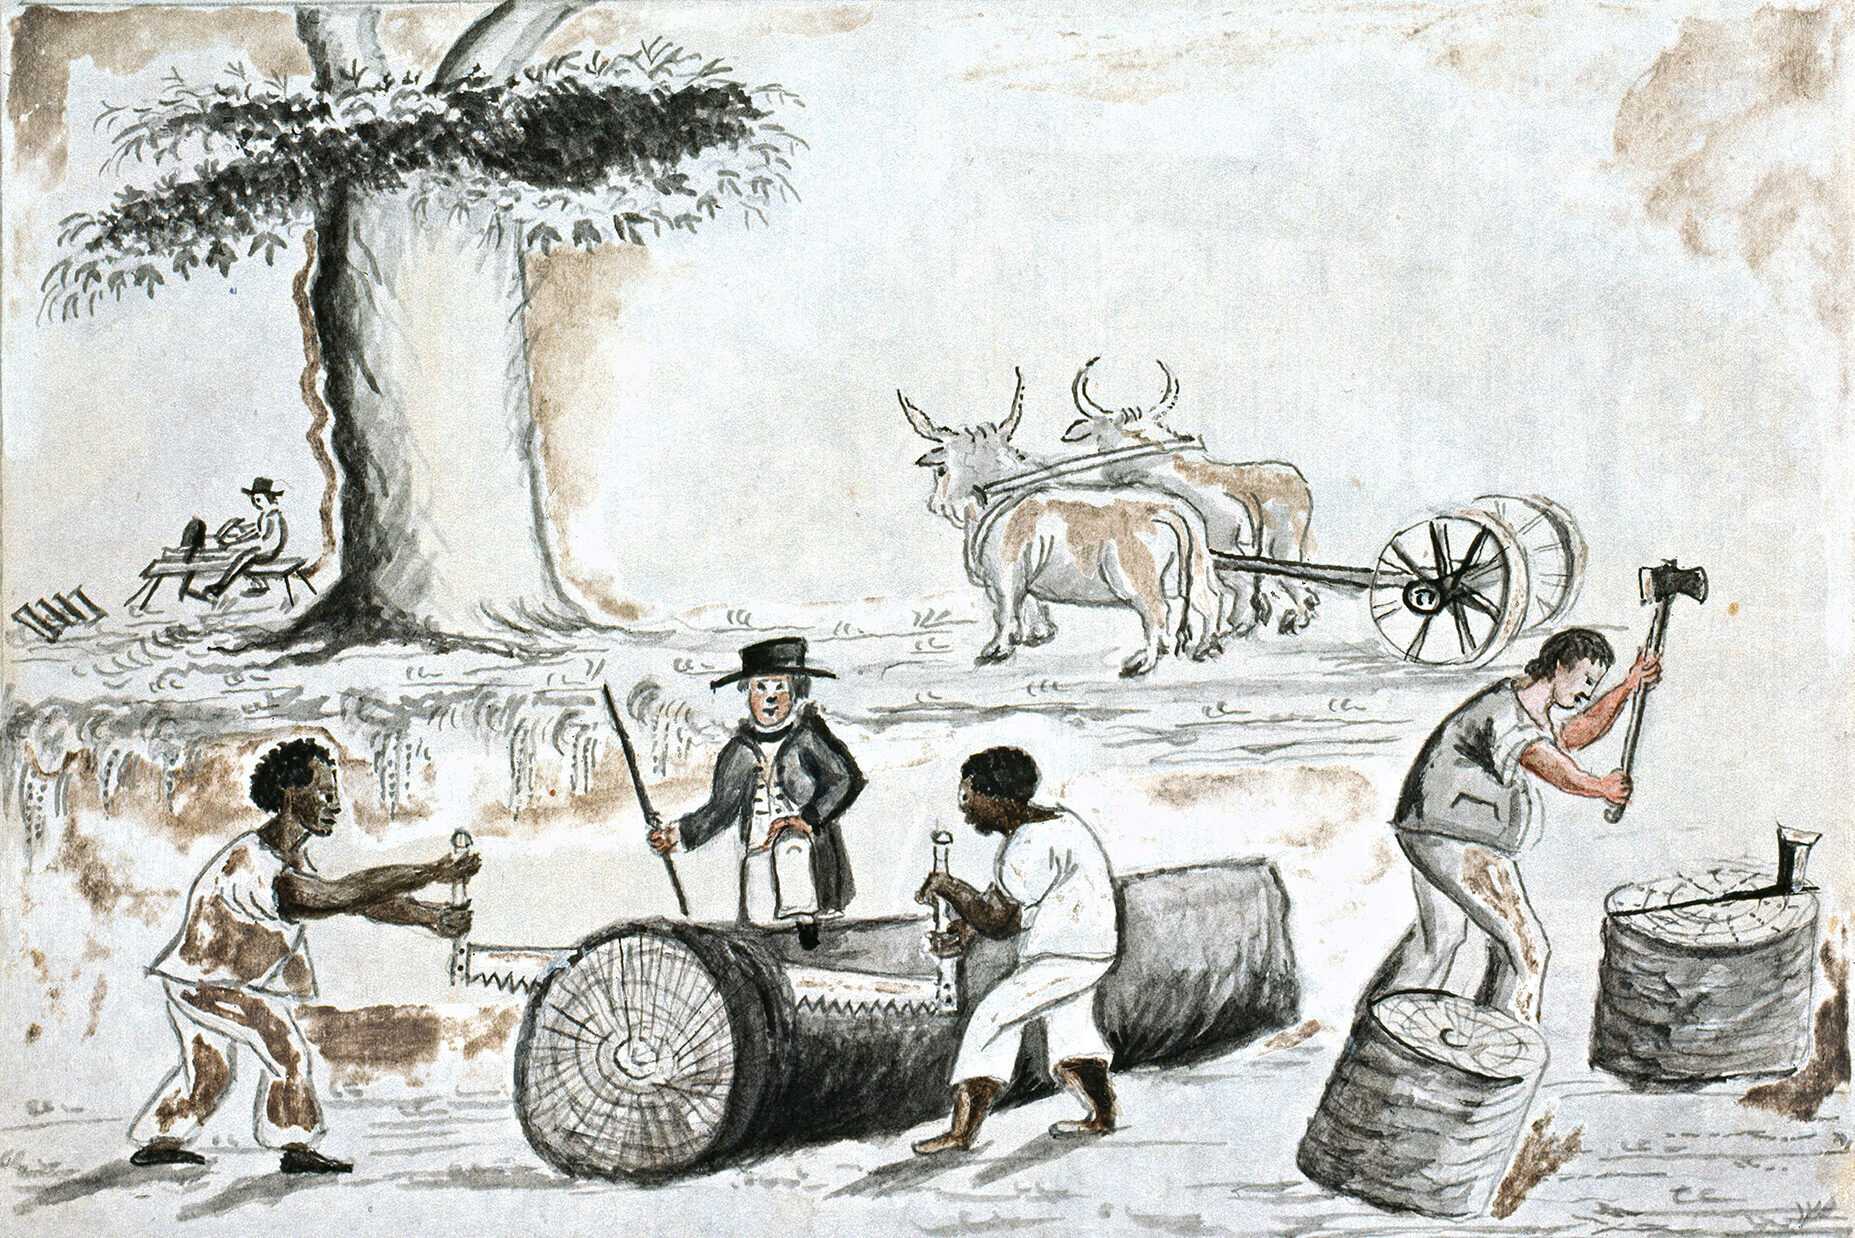 Image of people cutting timber